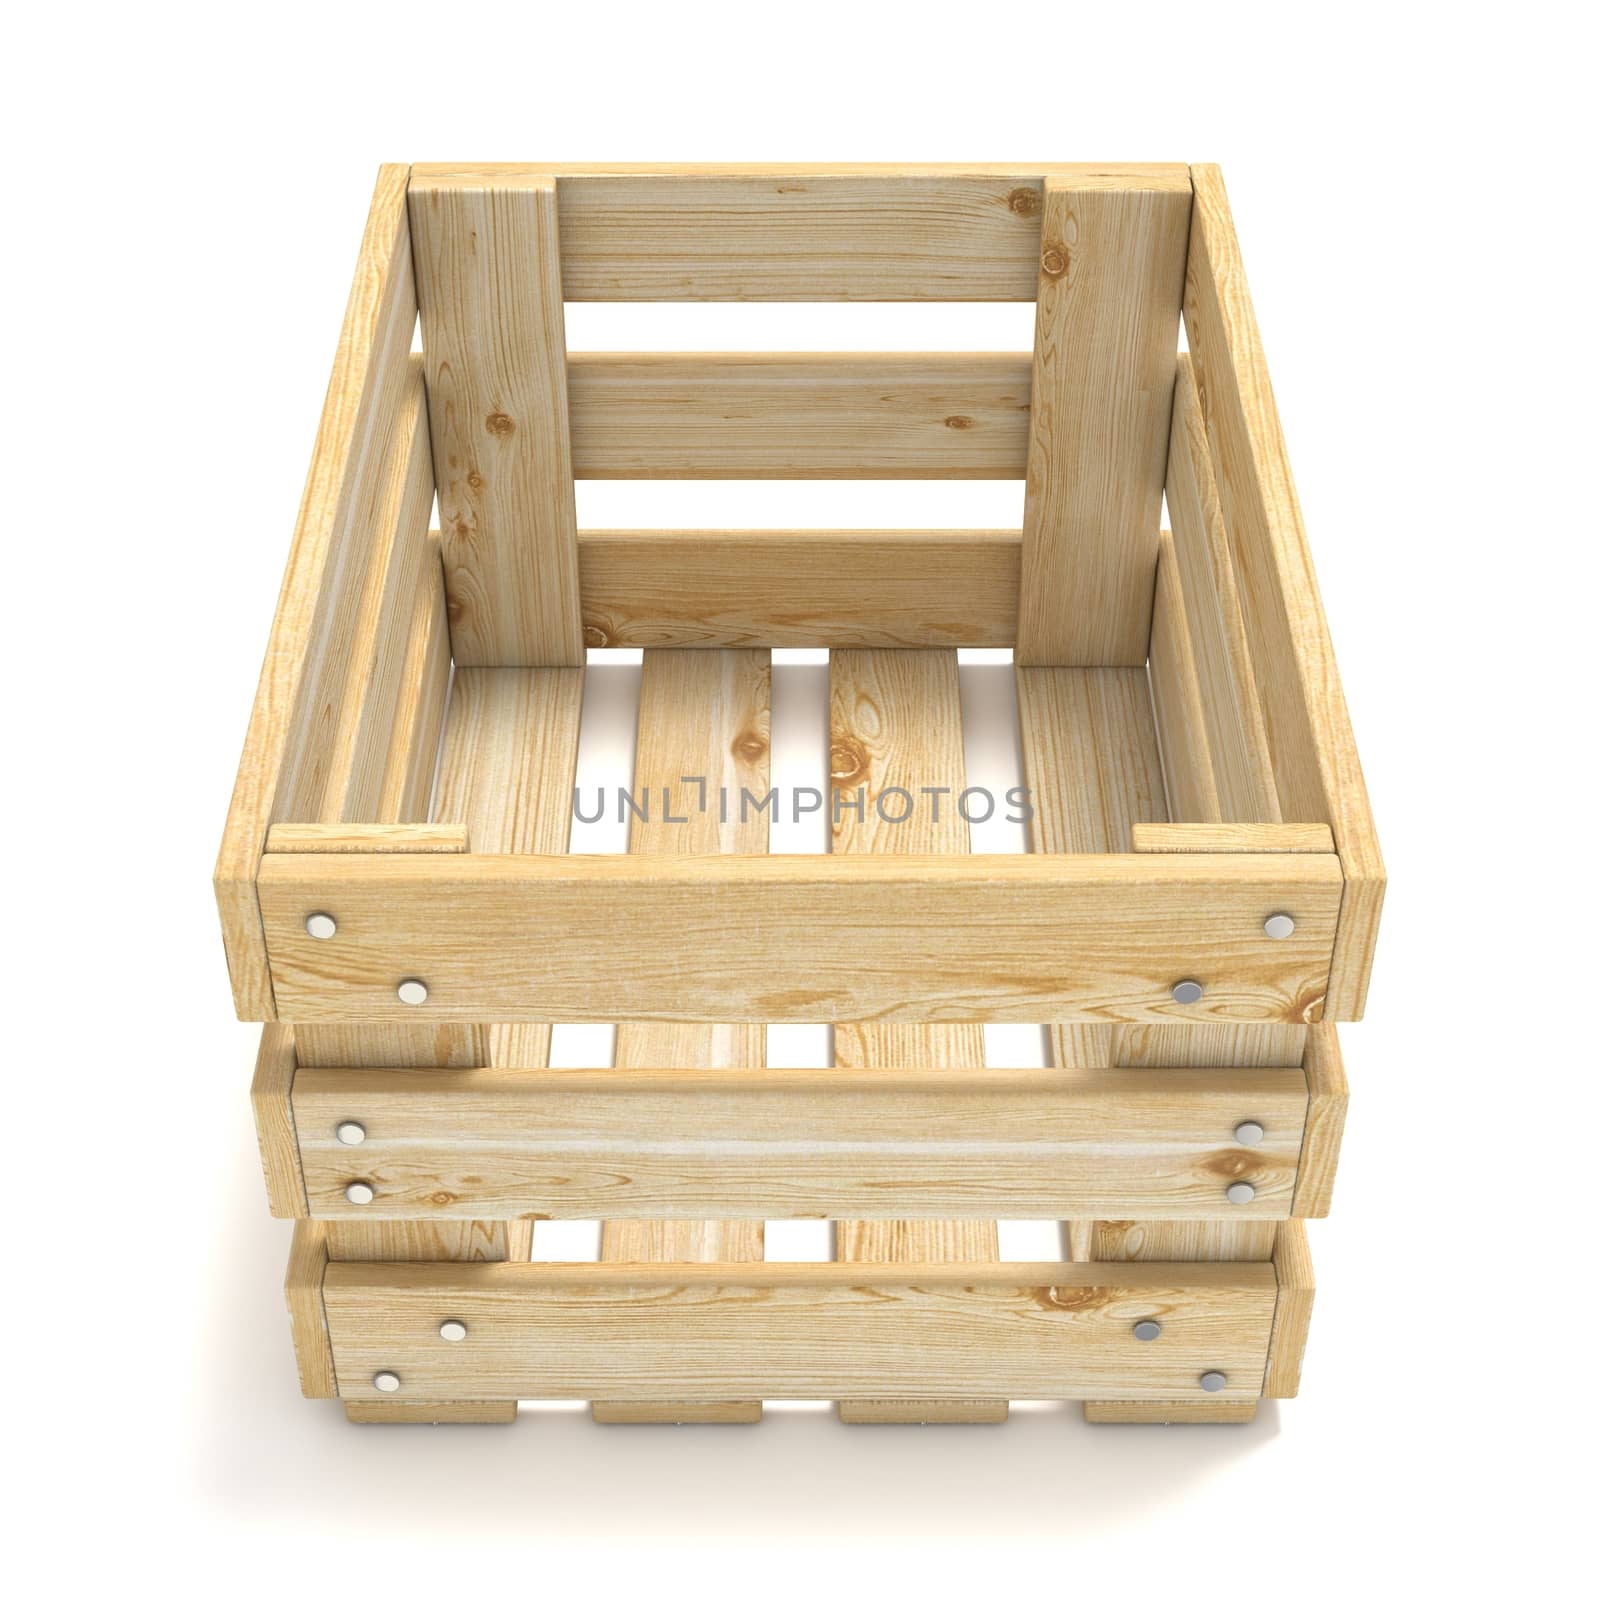 Empty wooden crate. Front view. 3D render illustration isolated on white background